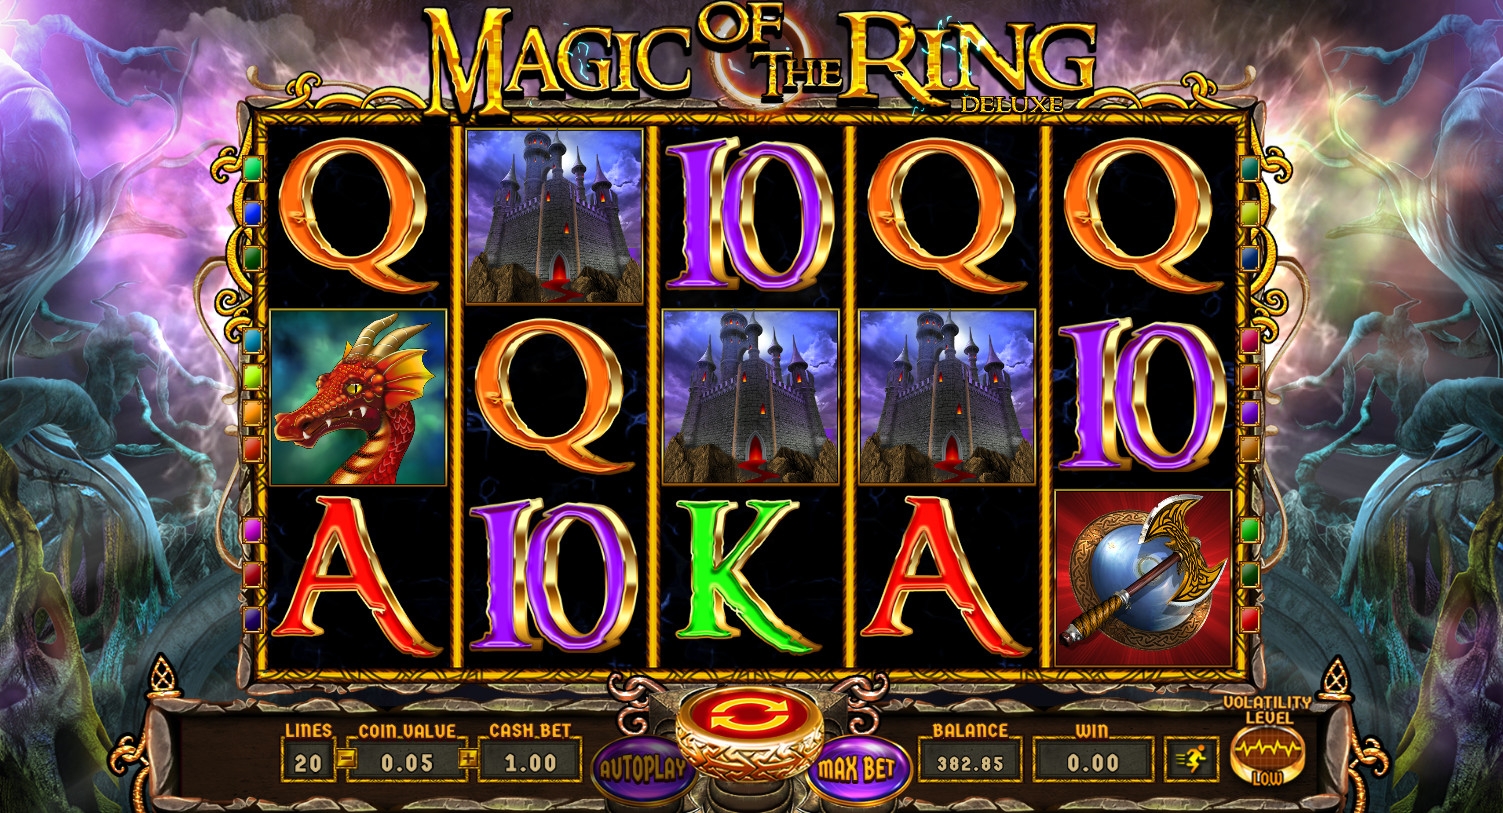 Magic of the Ring (Magic of the Ring) from category Slots